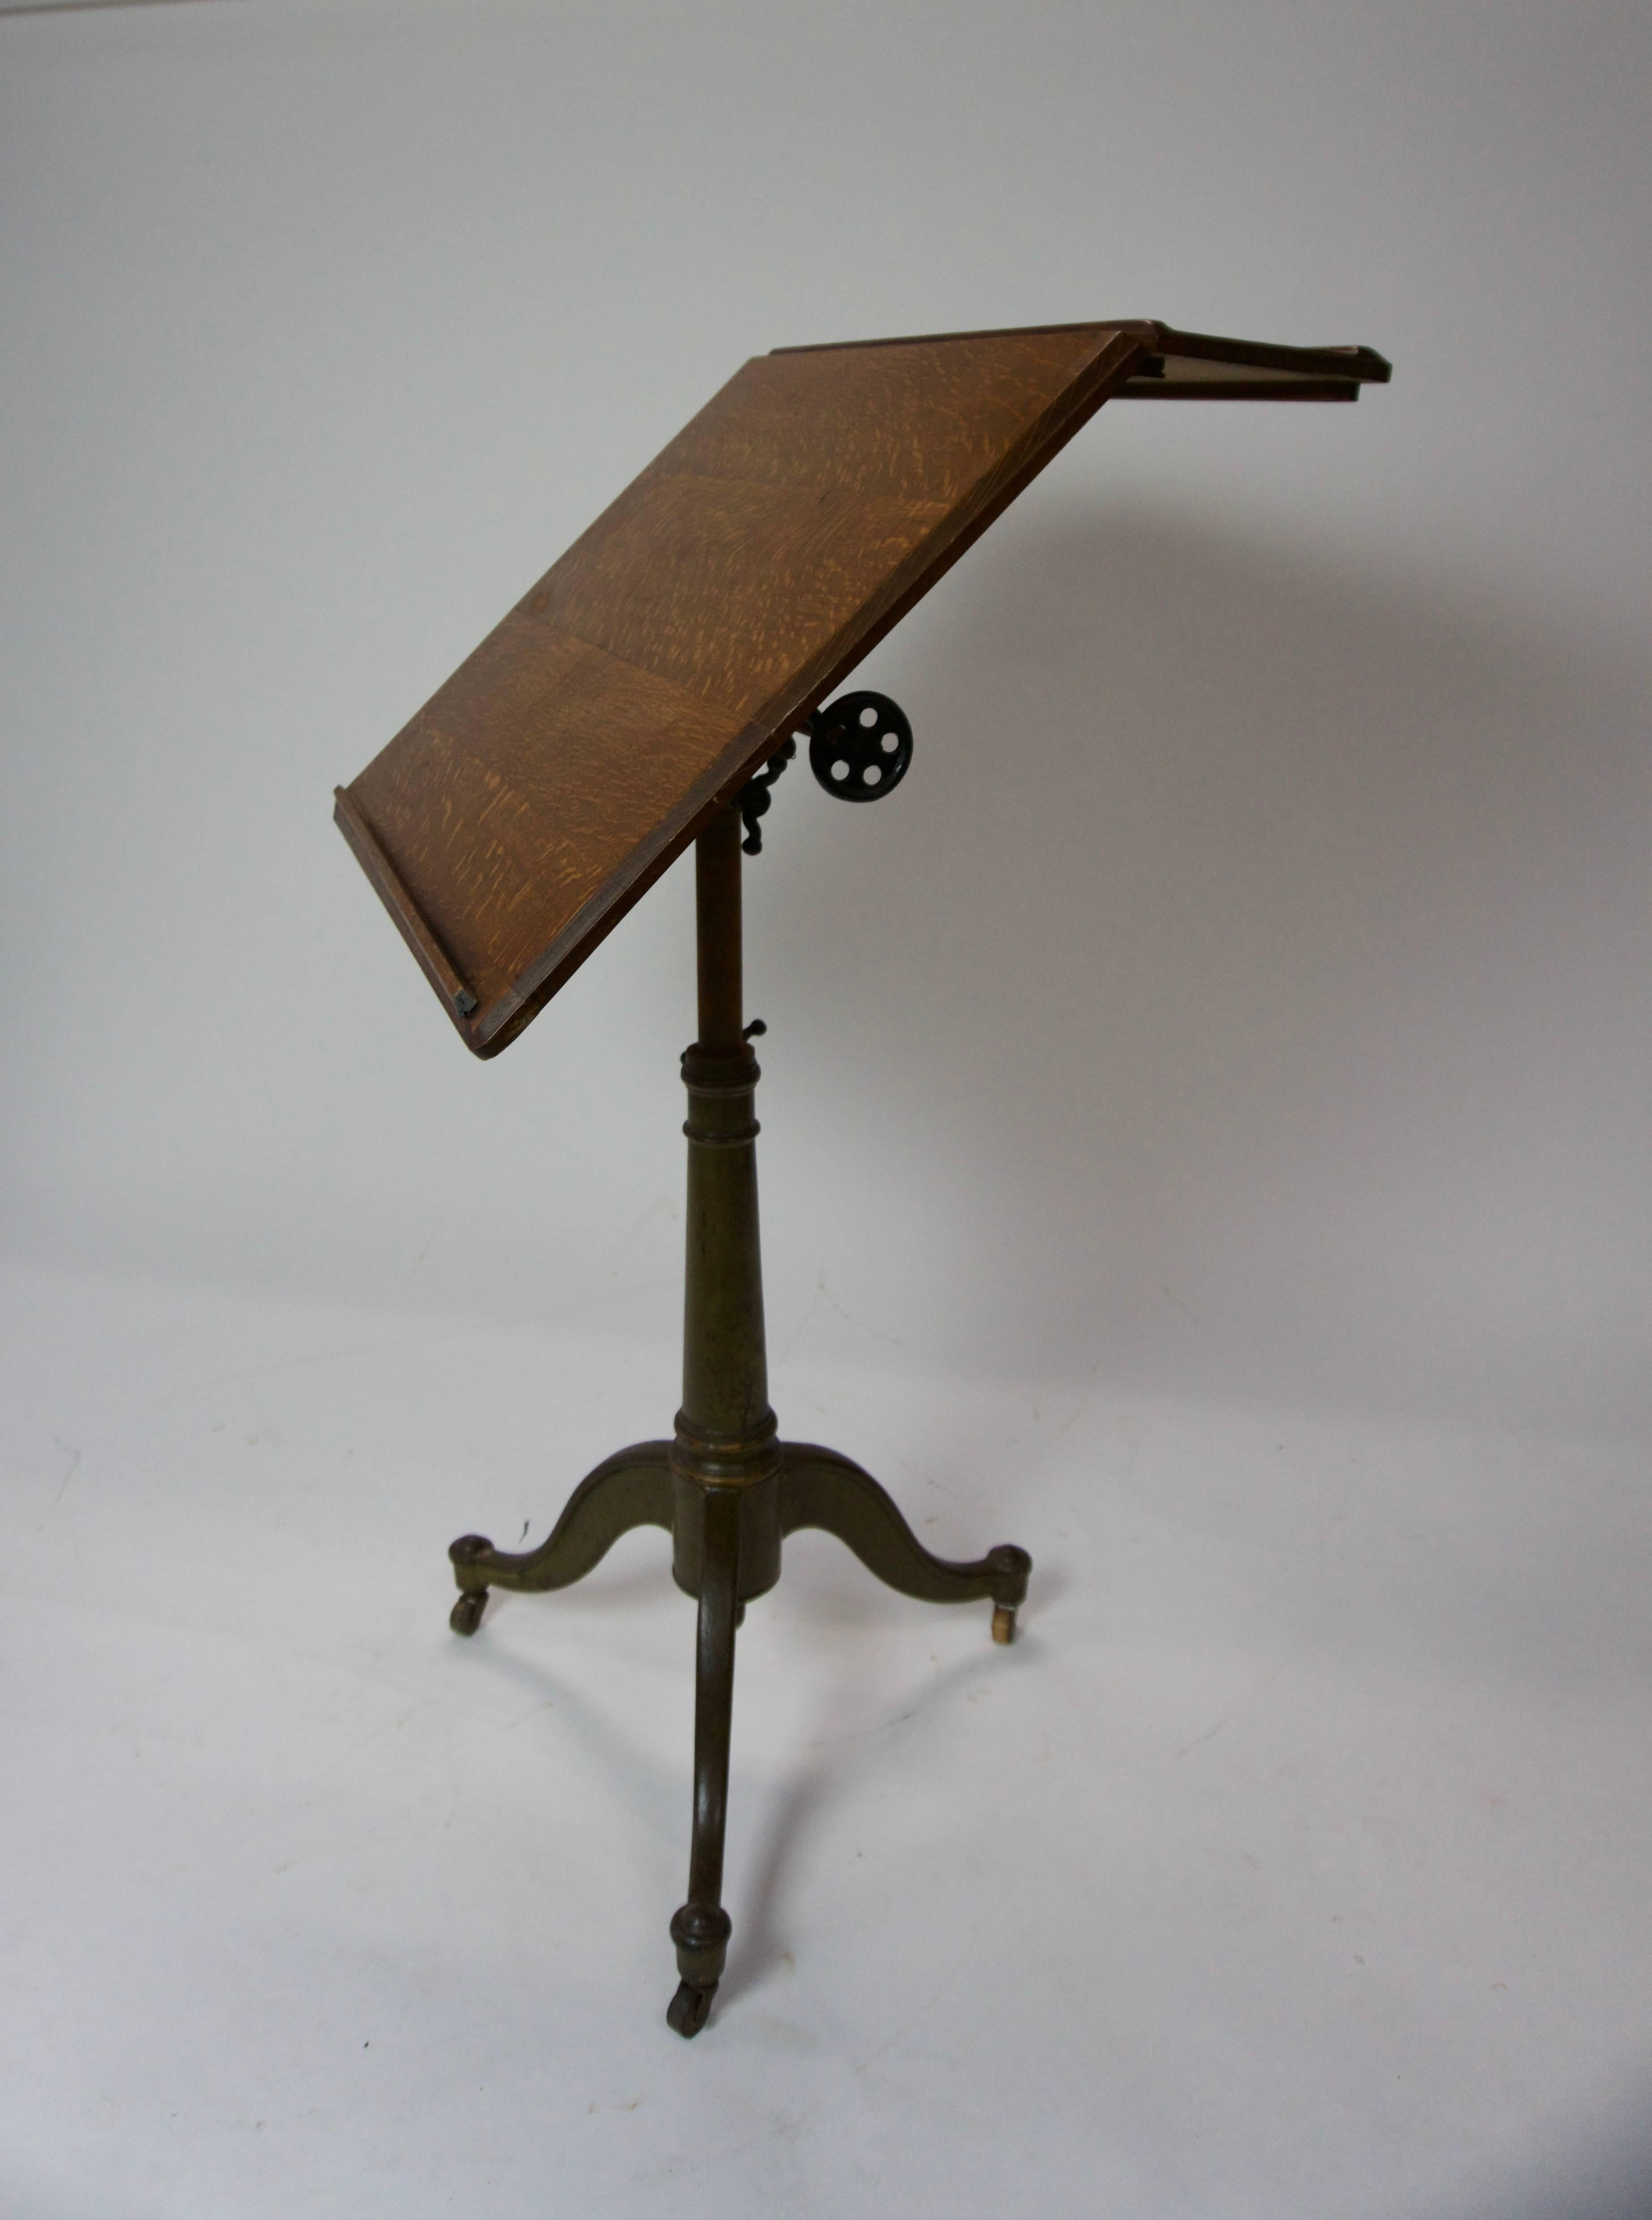 Cast iron base stand with a tan/brown paint color. Typical wear on the paint. Solid oak top will fold to almost flat. Has a few scuffs and minor scratches. One wheel adjustment. Wheels roll nicely, but are not permanently welded in. Height is